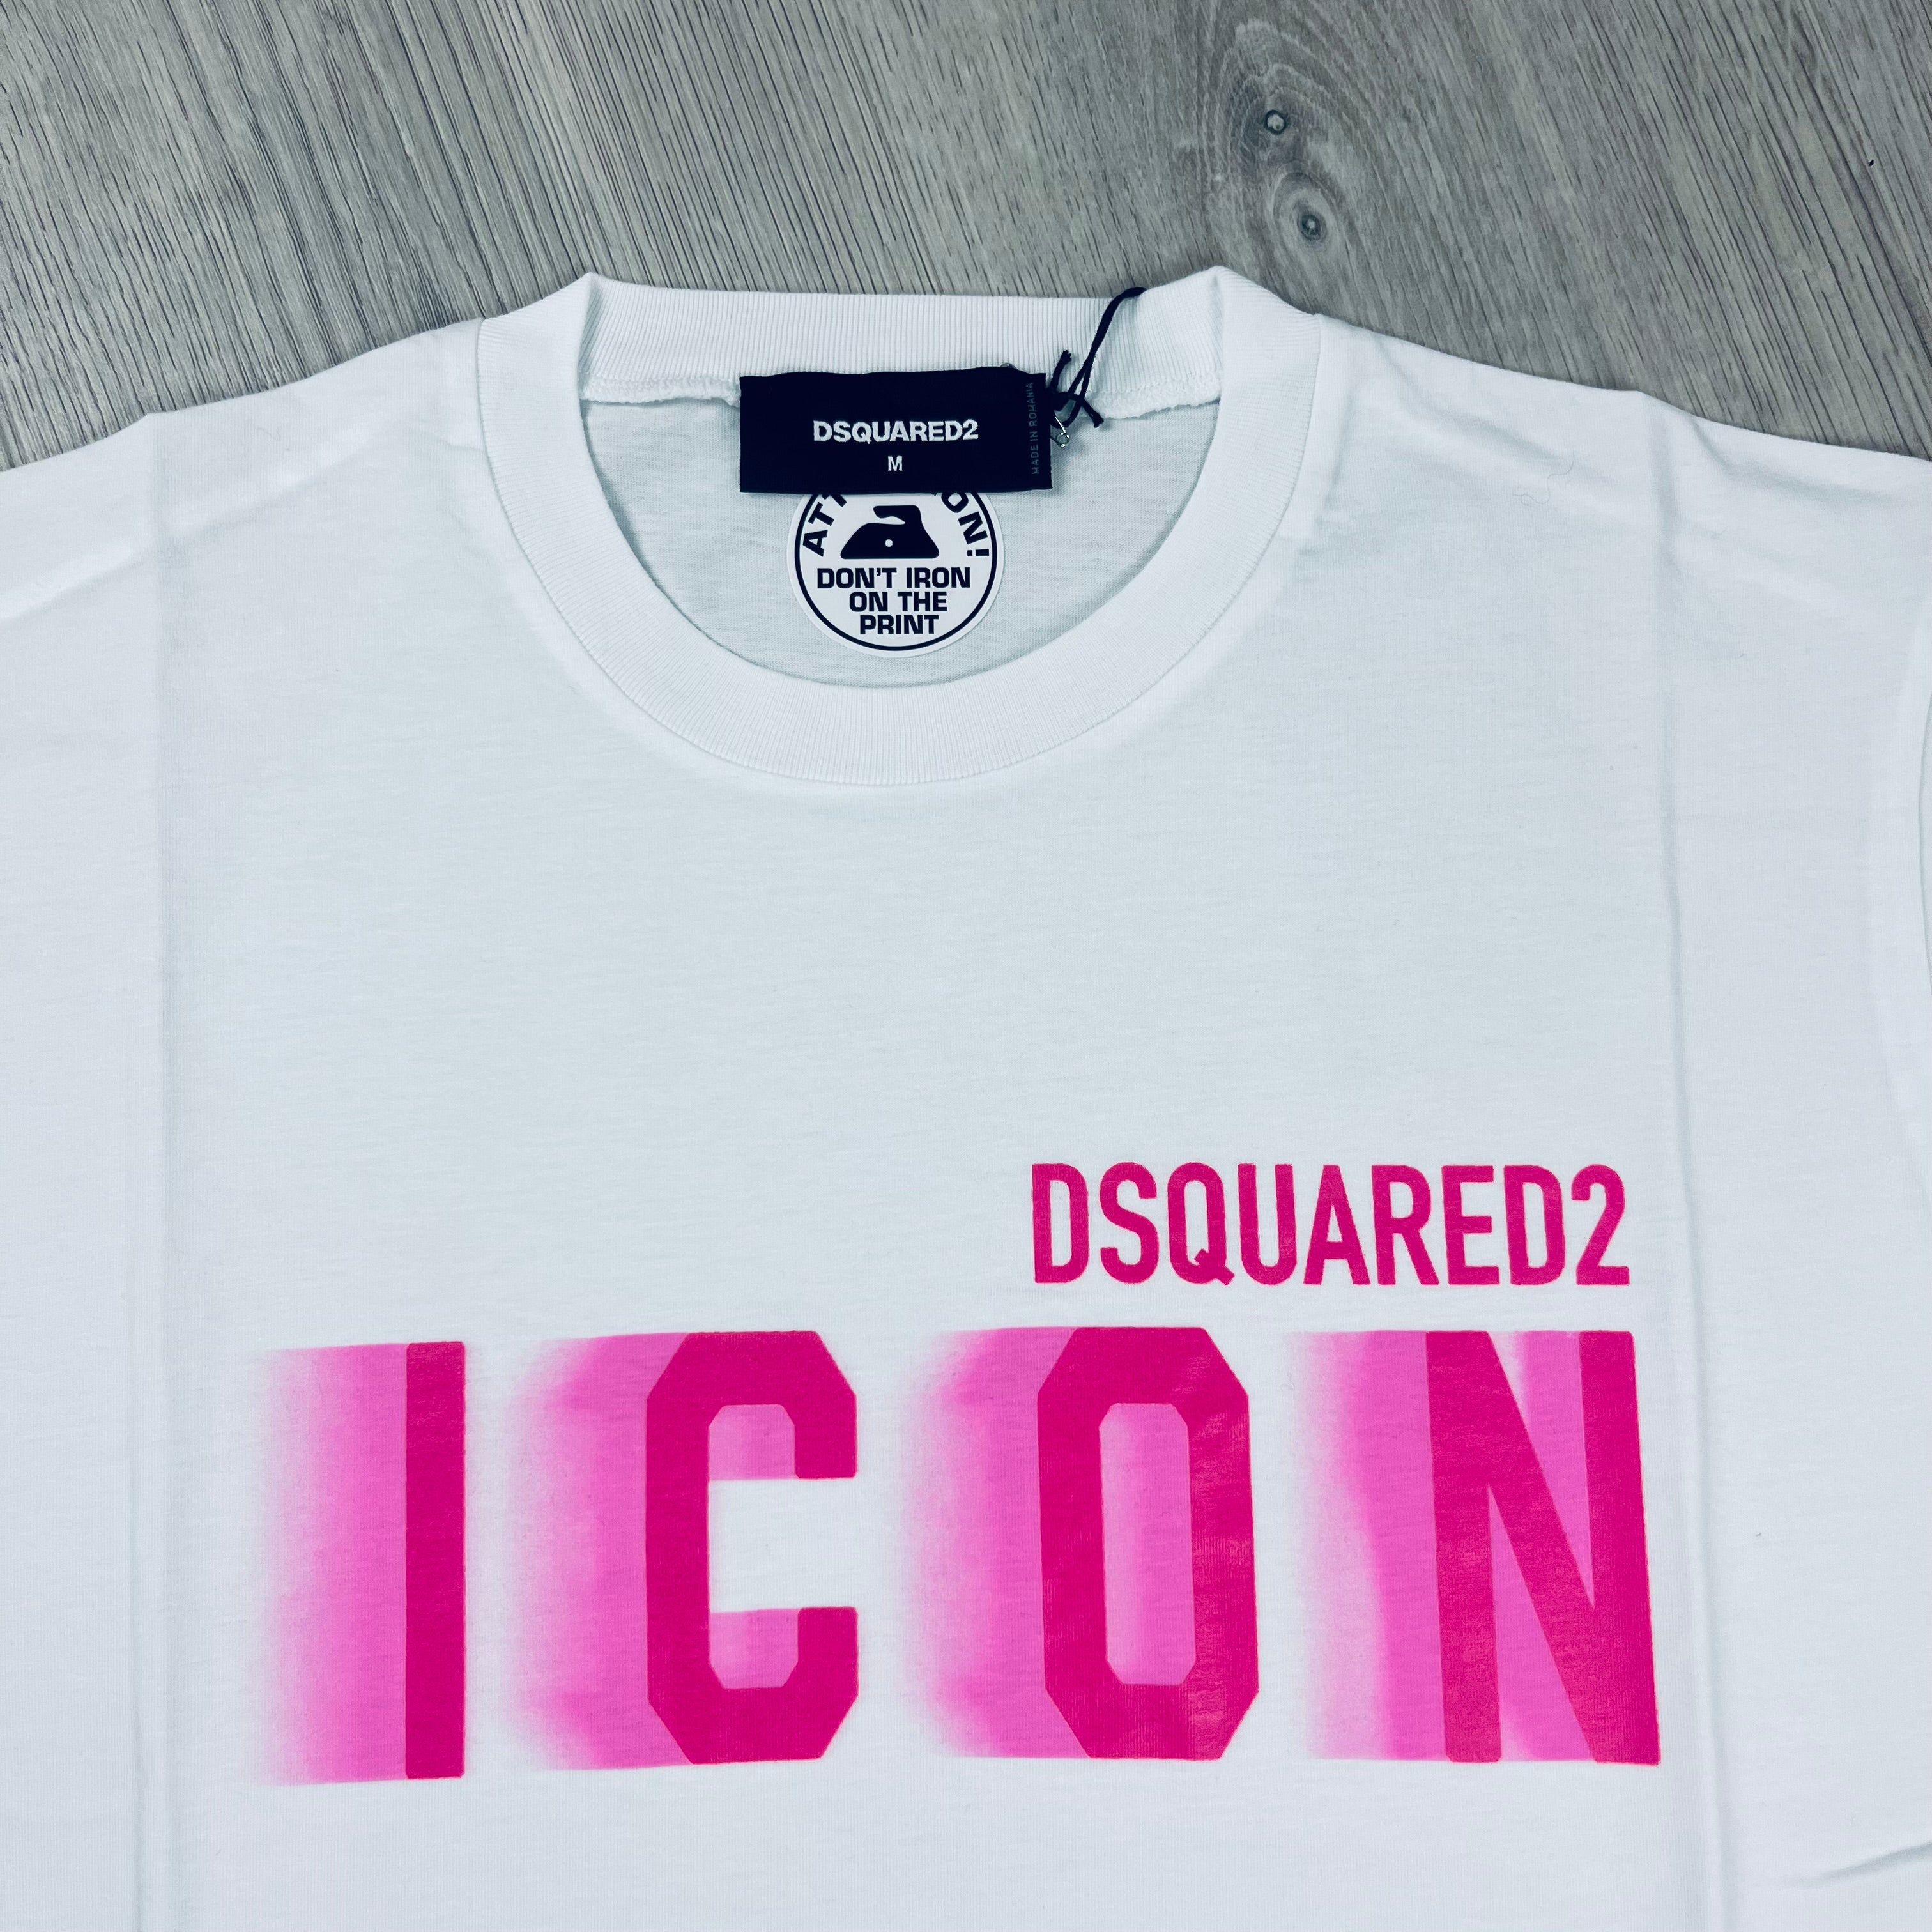 DSQUARED2 ICON T-Shirt